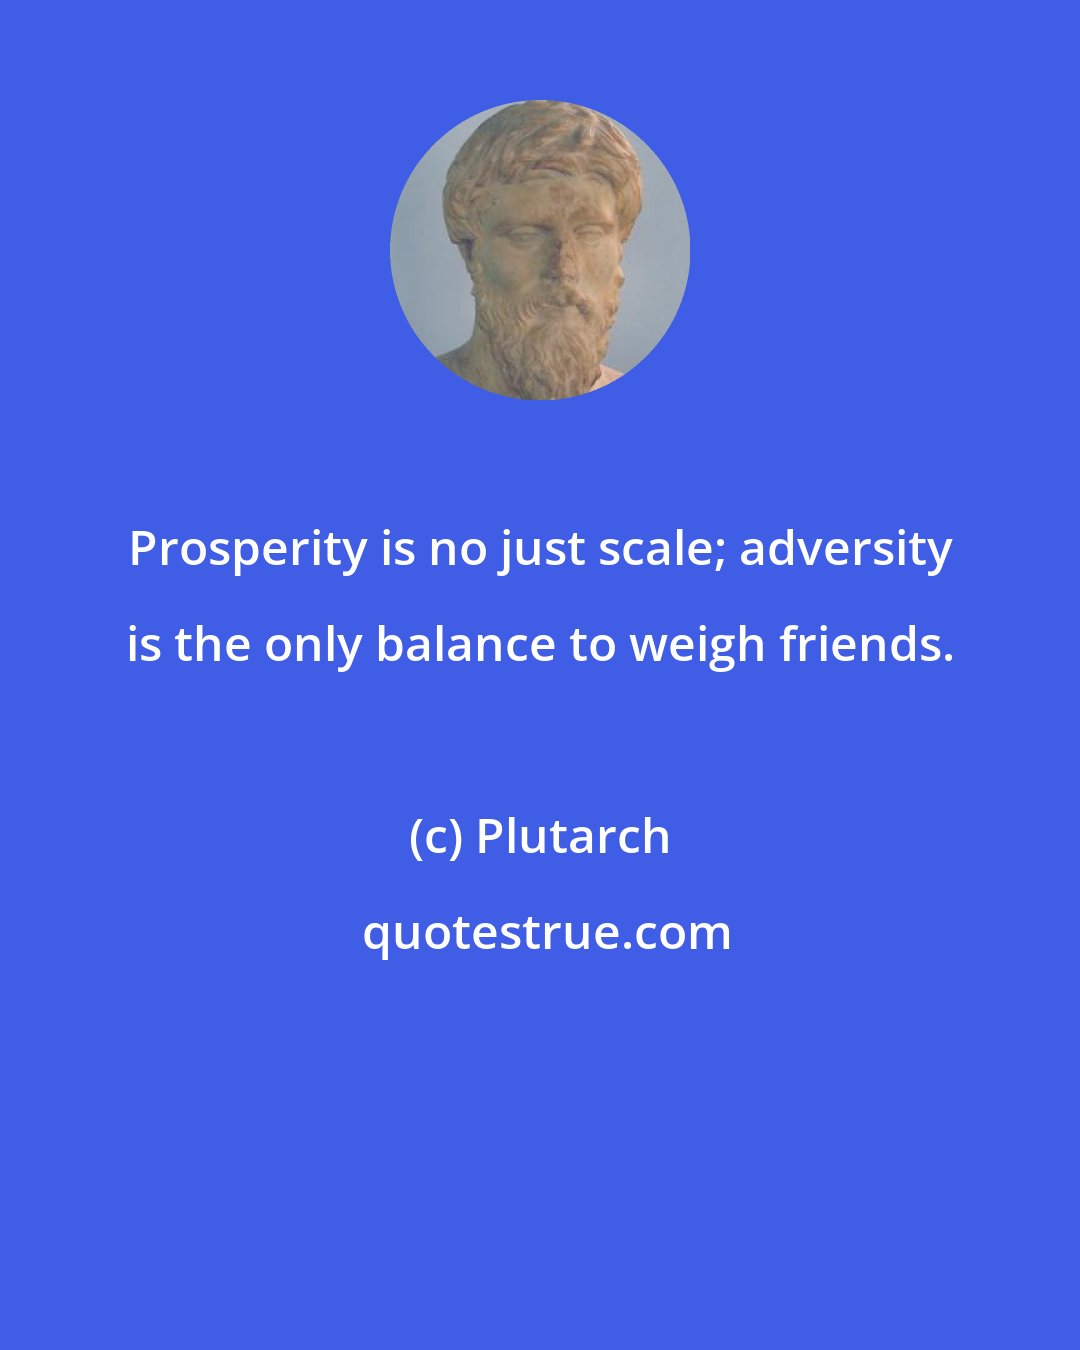 Plutarch: Prosperity is no just scale; adversity is the only balance to weigh friends.